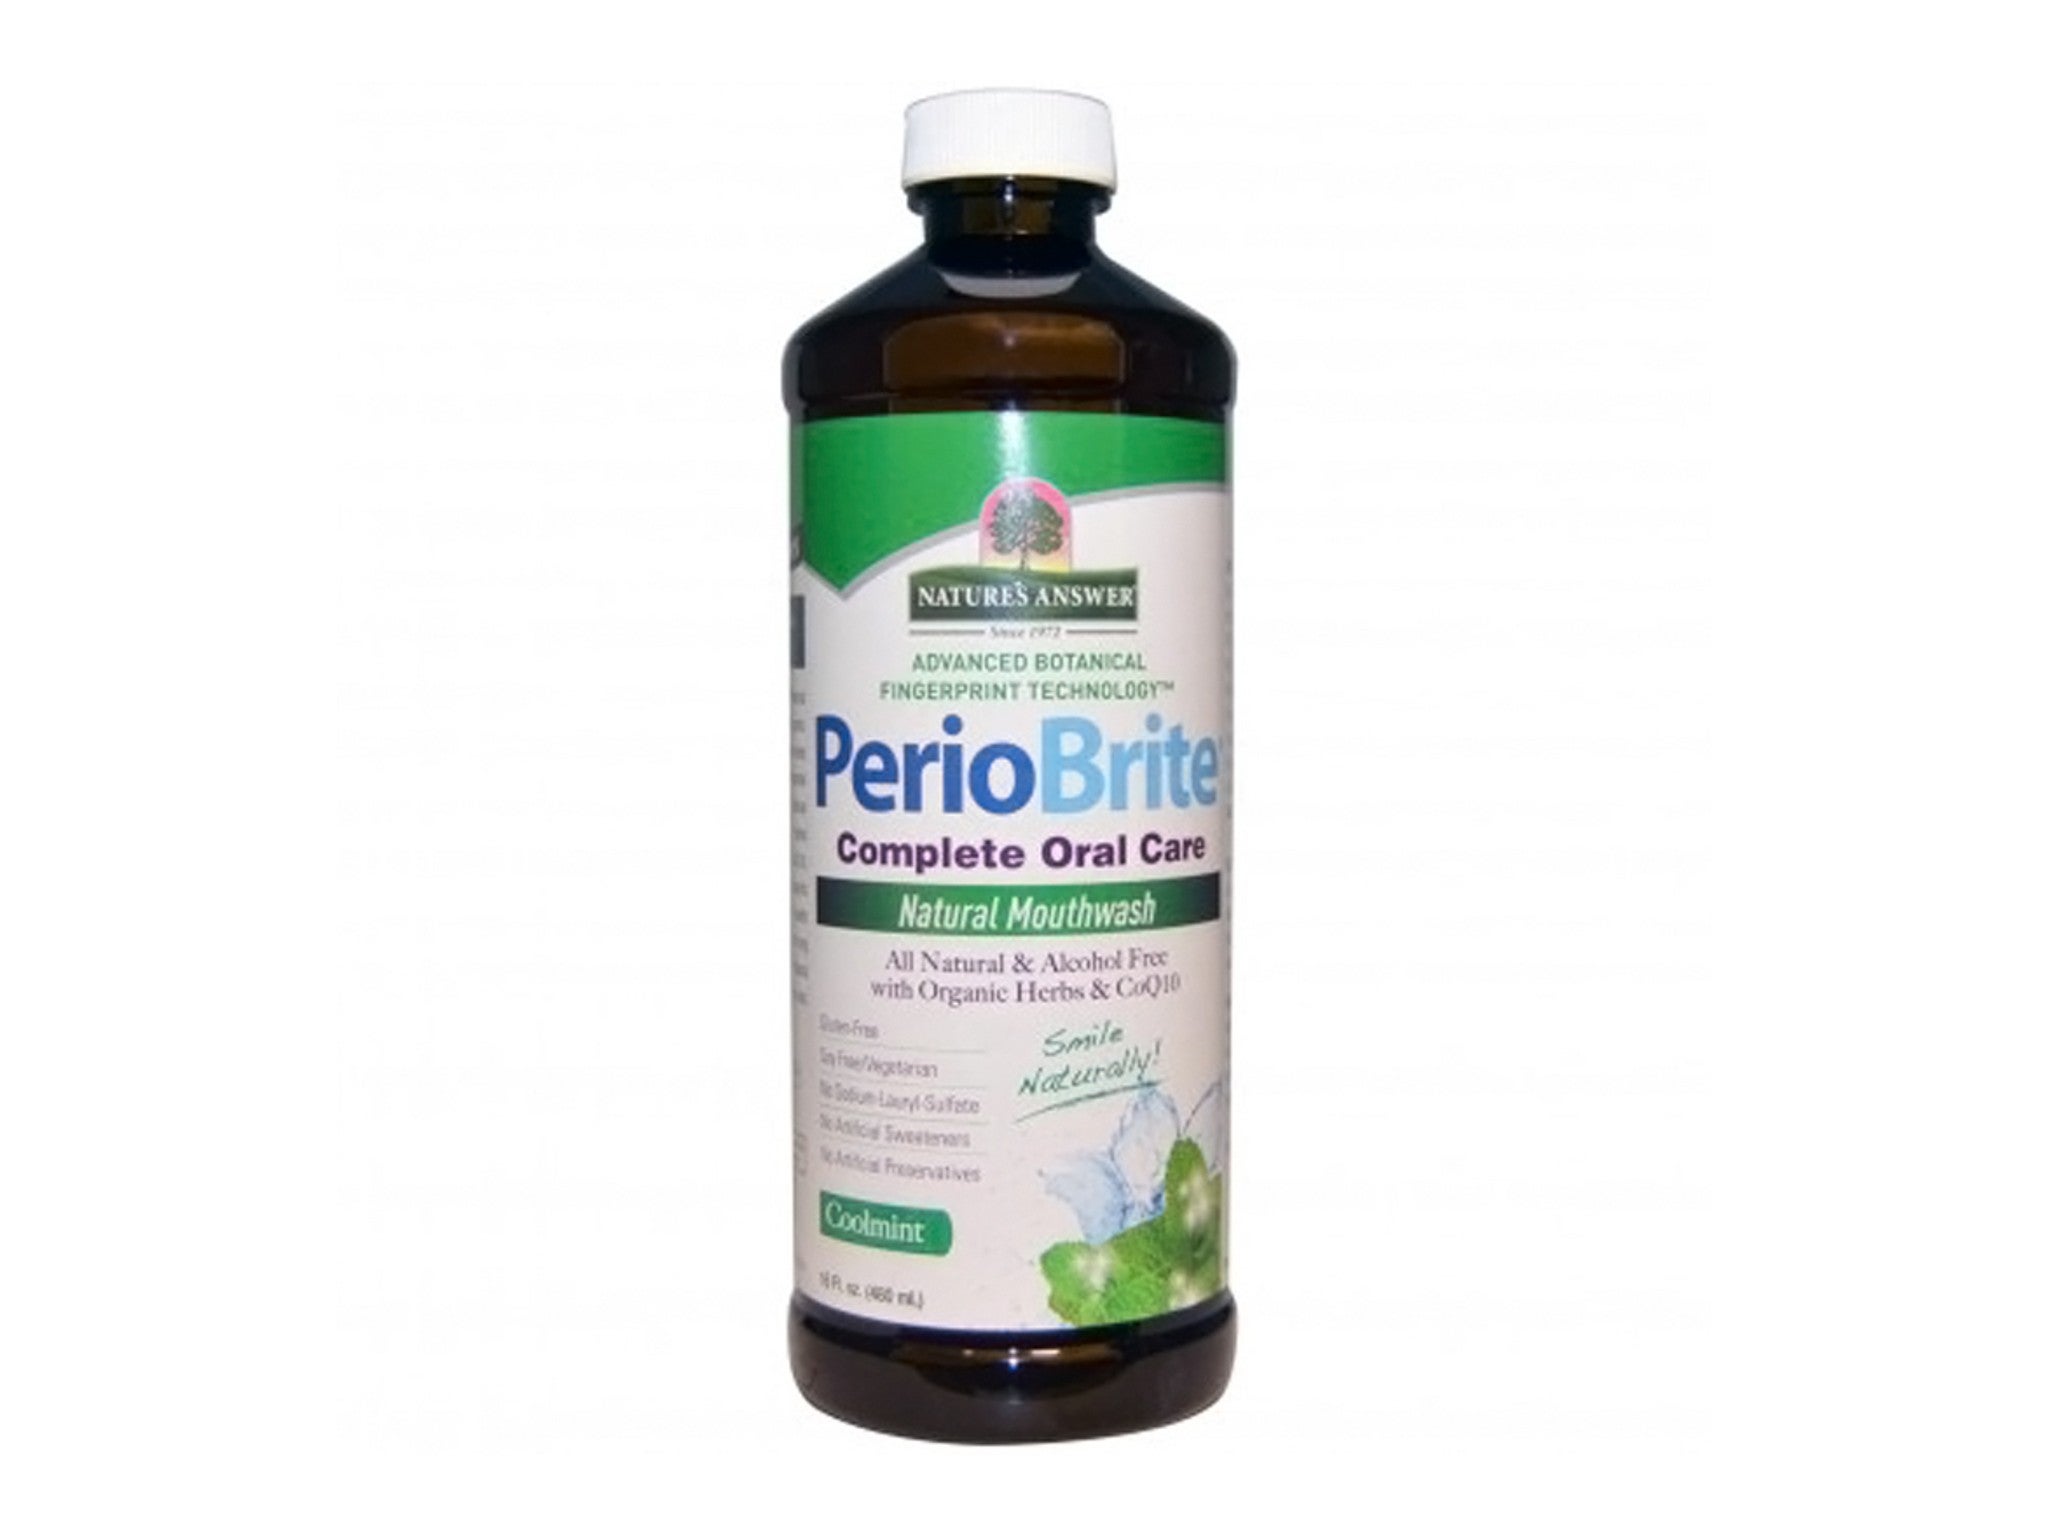 Nature’s Answer PerioBrite natural mouthwash indybest.jpg